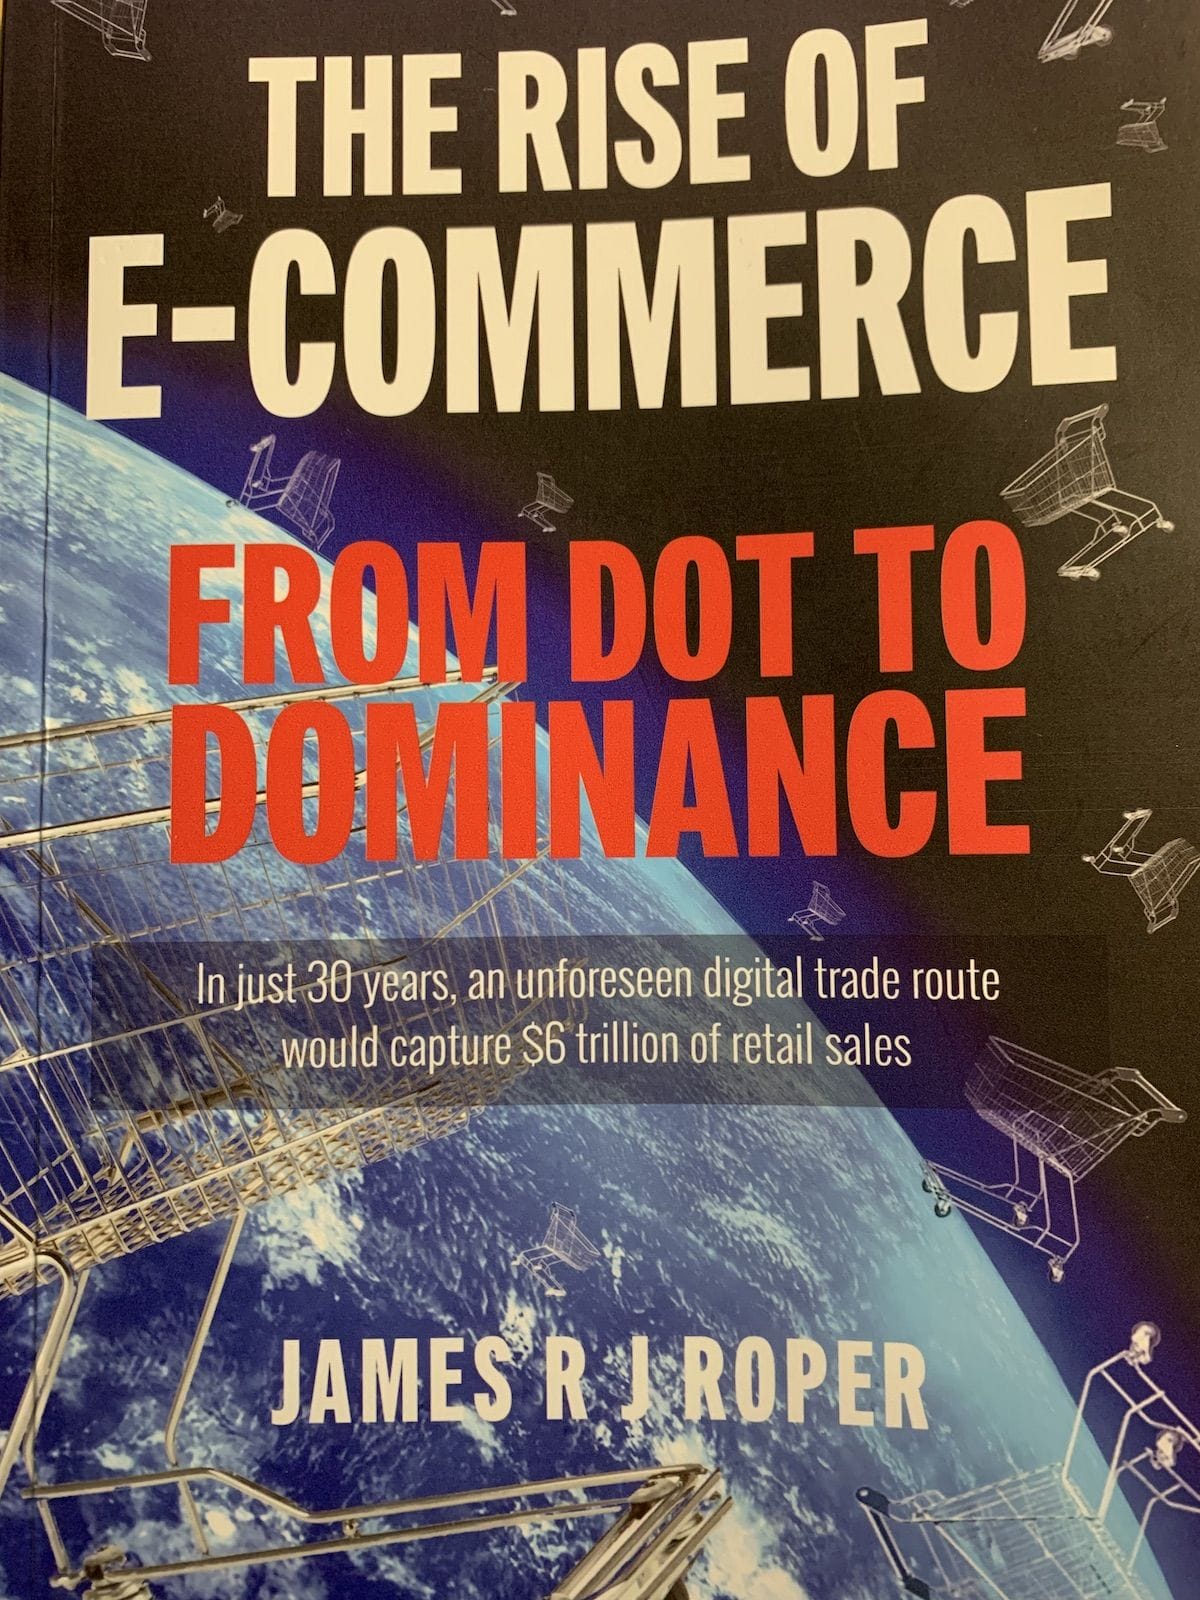 Book review: Charting the incredible e-commerce journey.